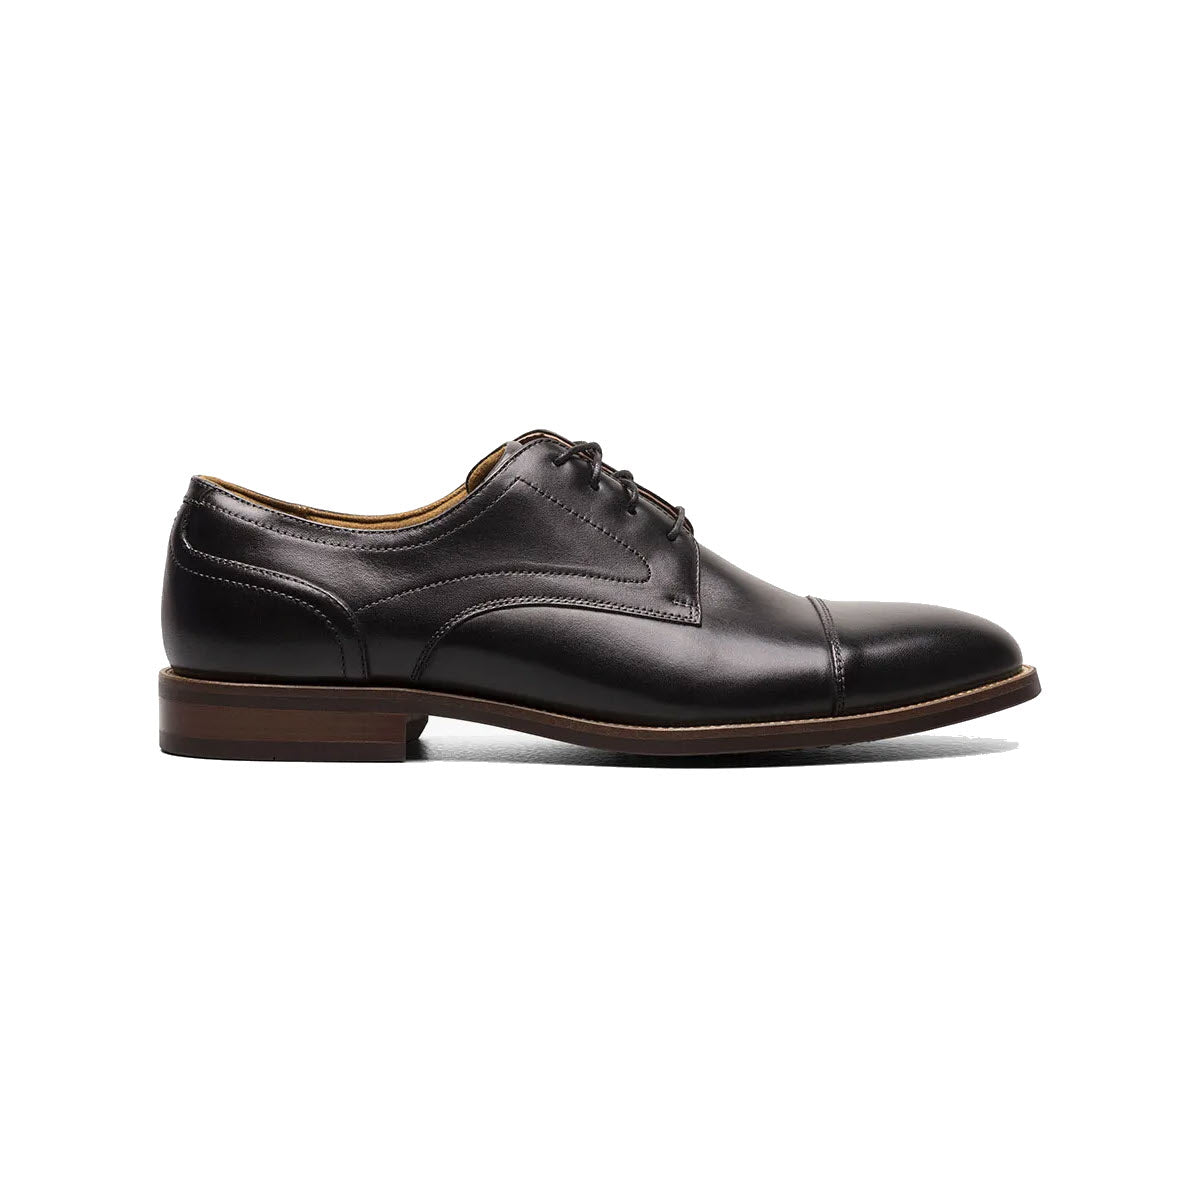 A single black leather Florsheim FLORSHEIM RUCCI CAP TOE OXFORD BLACK - MENS with lace-up front and brown sole, isolated on a white background.